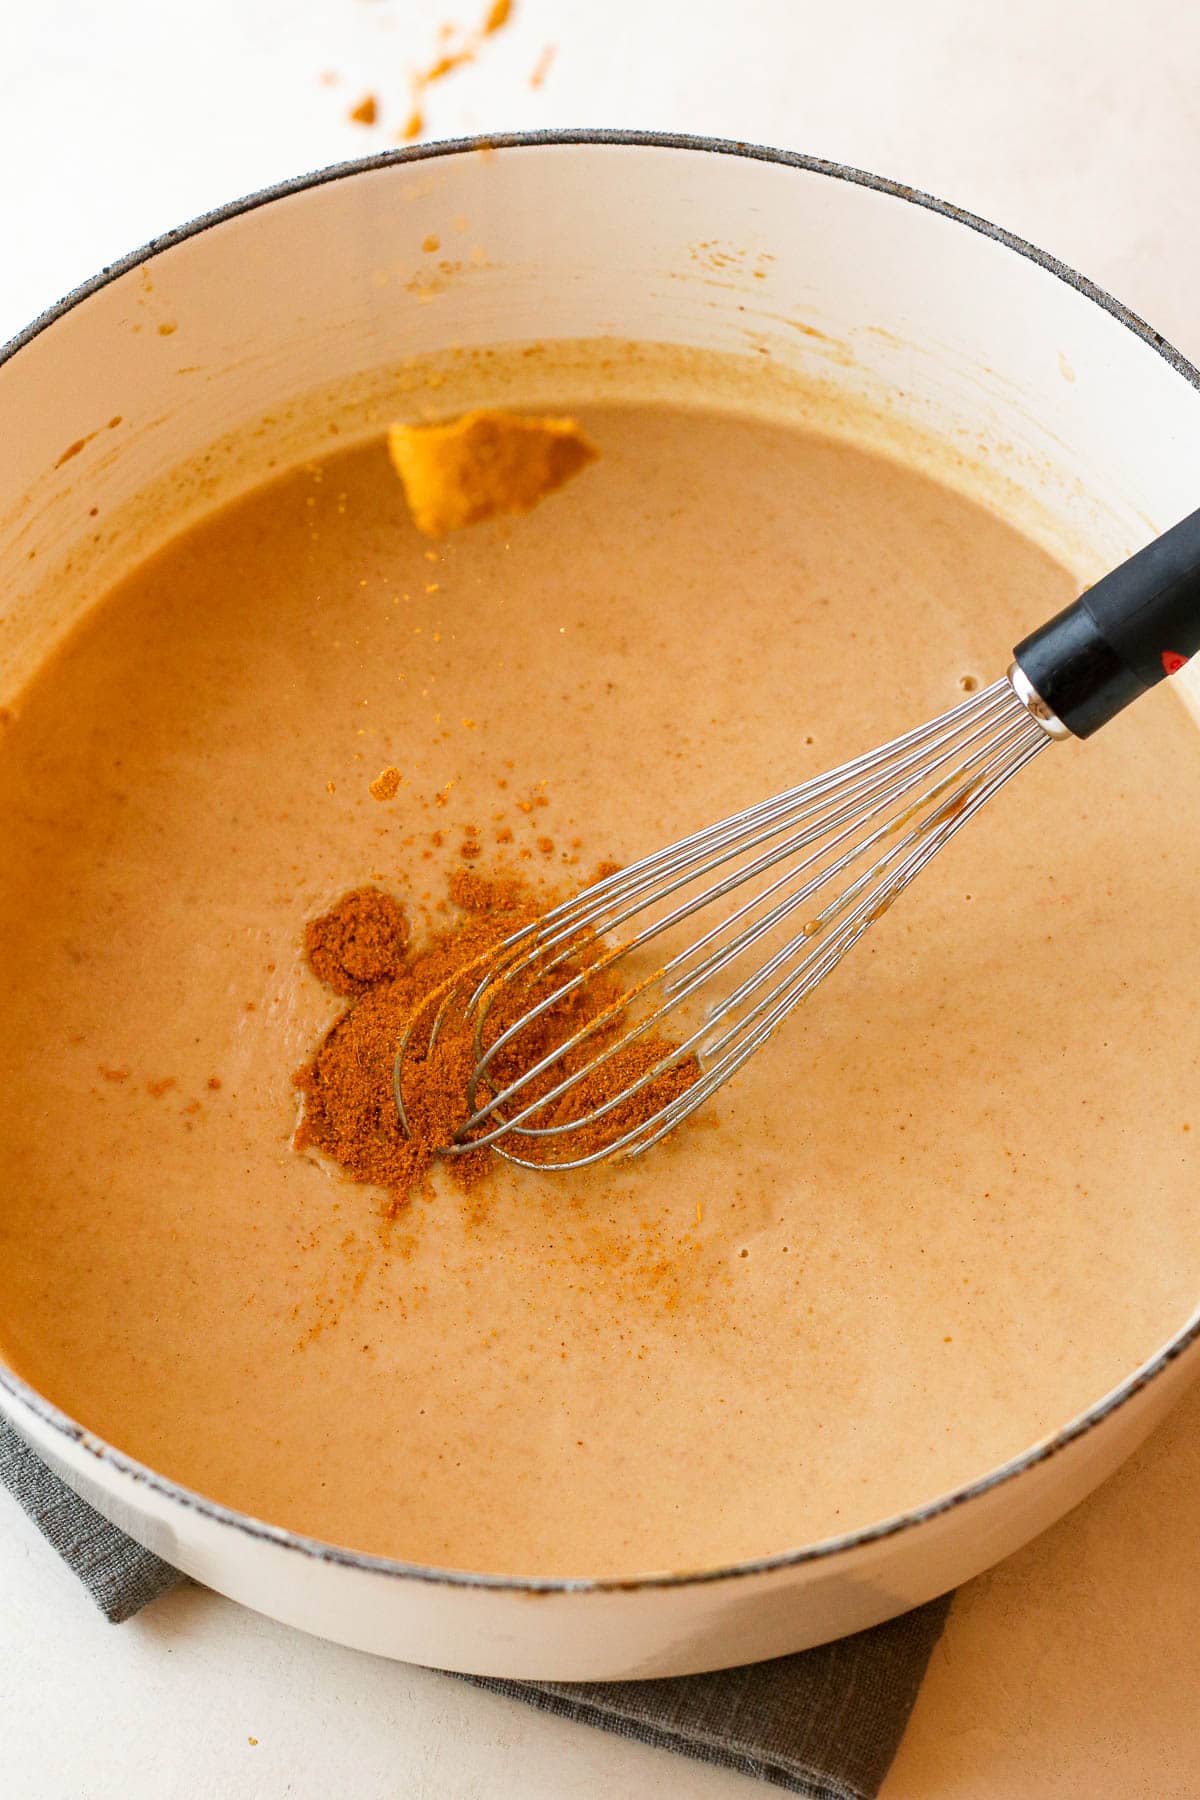 curry powder being added to sauce with whisk.